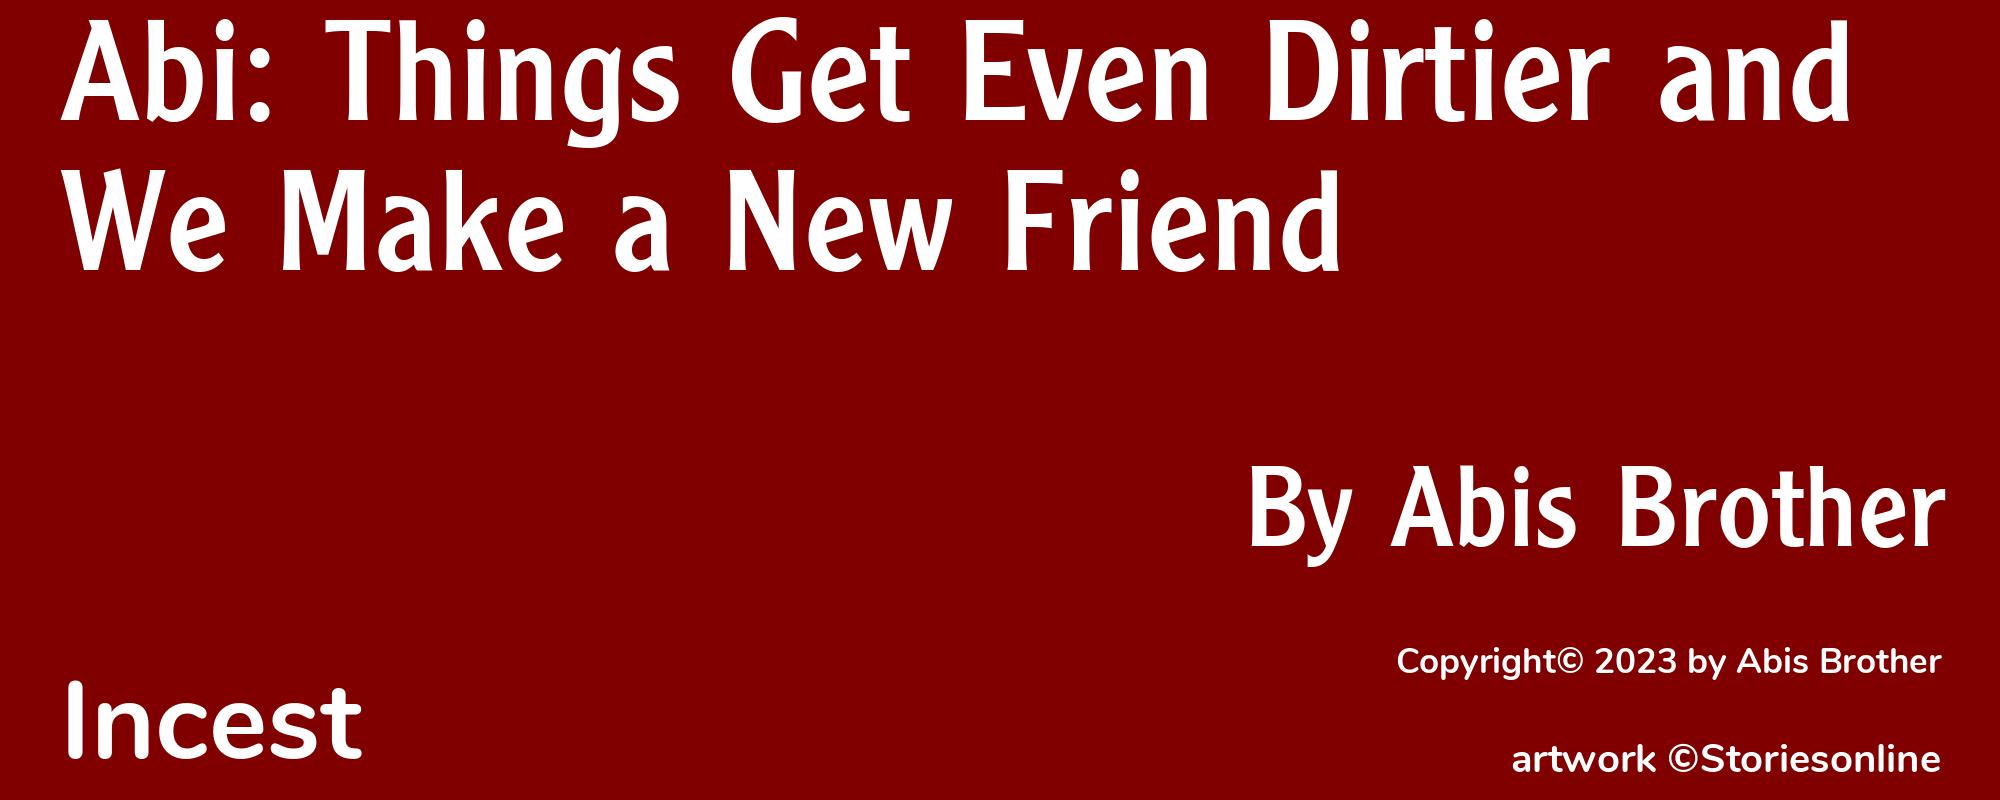 Abi: Things Get Even Dirtier and We Make a New Friend - Cover